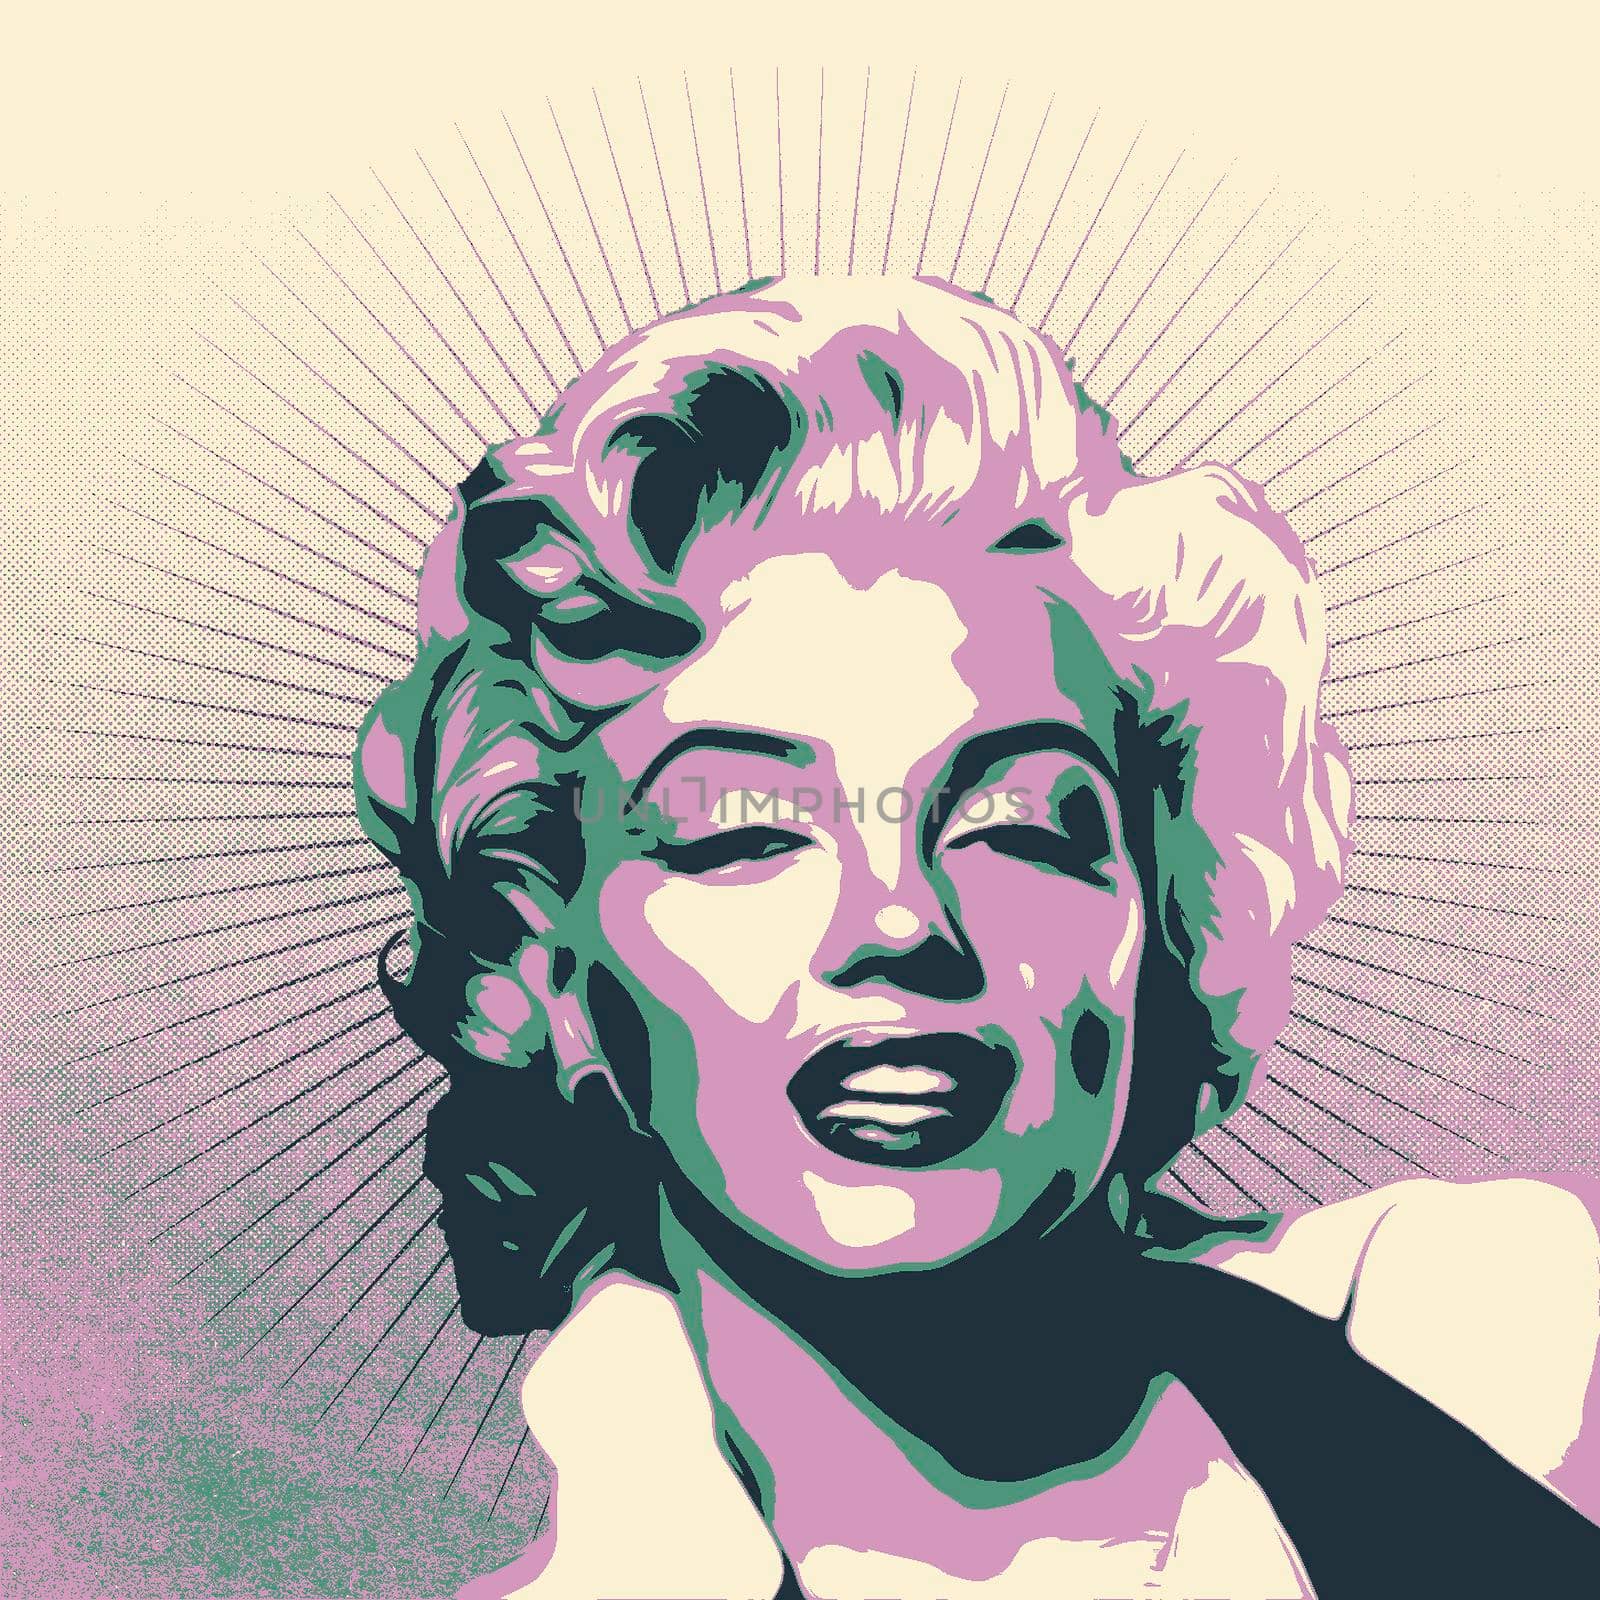 Trieste, Italy - July 16: Digital portrait of Marylin Monroe finished with stencil or silkscreen printing technique on July 16, 2021